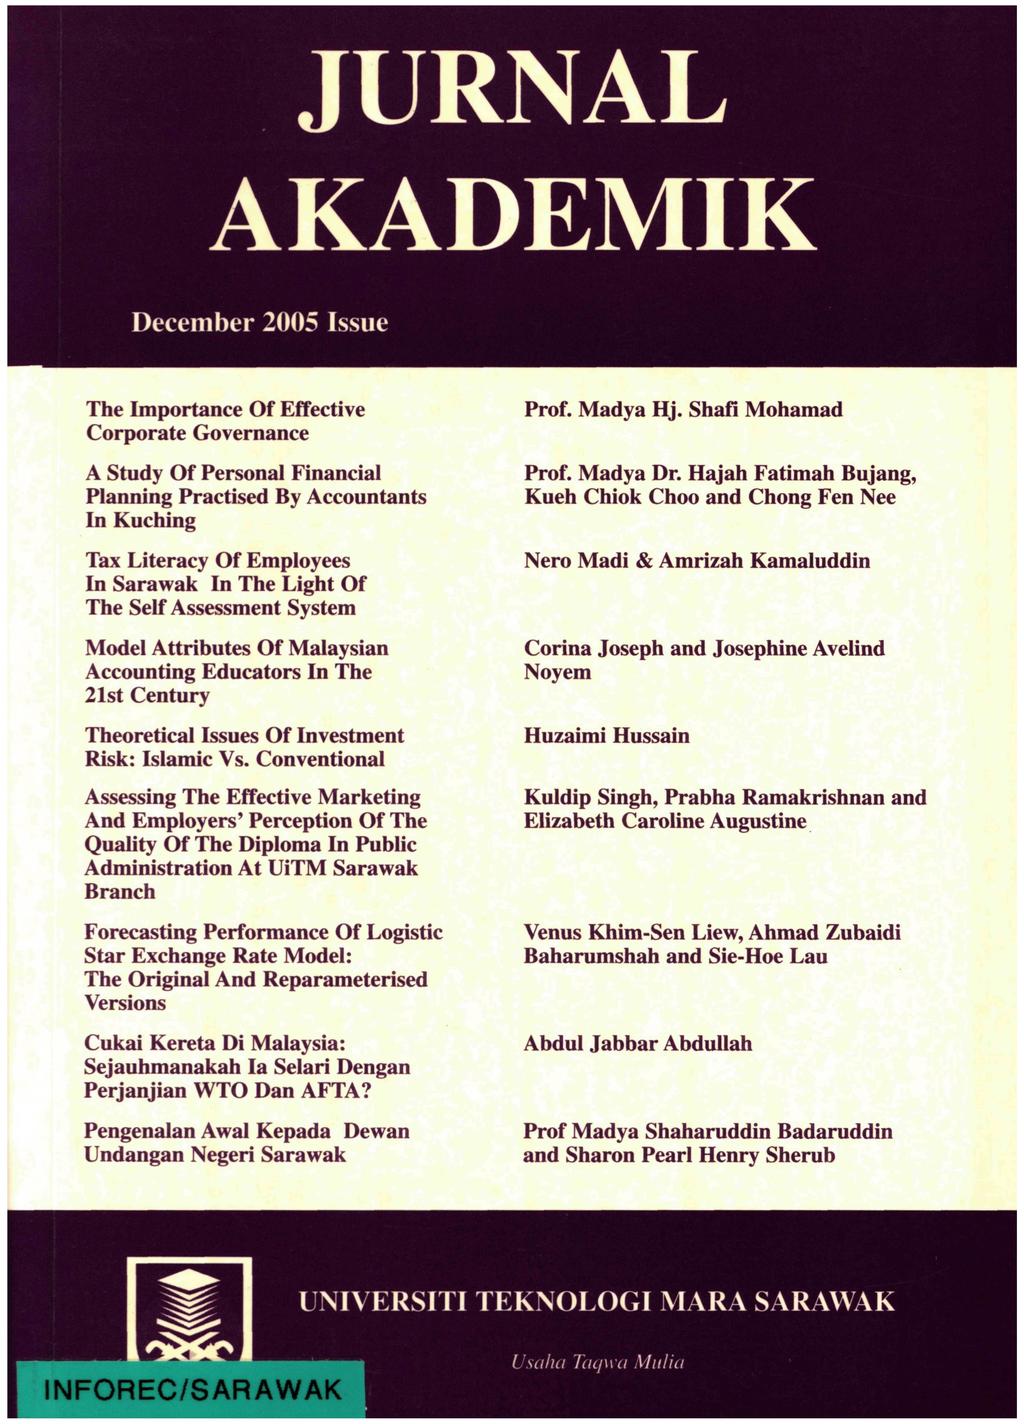 JURNAL AKADEMIK December 2005 Issue The Importance Of Effective Corporate Governance Prof. Madya Hj. Shafi Mohamad A Study Of Personal Financial Planning Practised By Accountants In Kuching Prof.